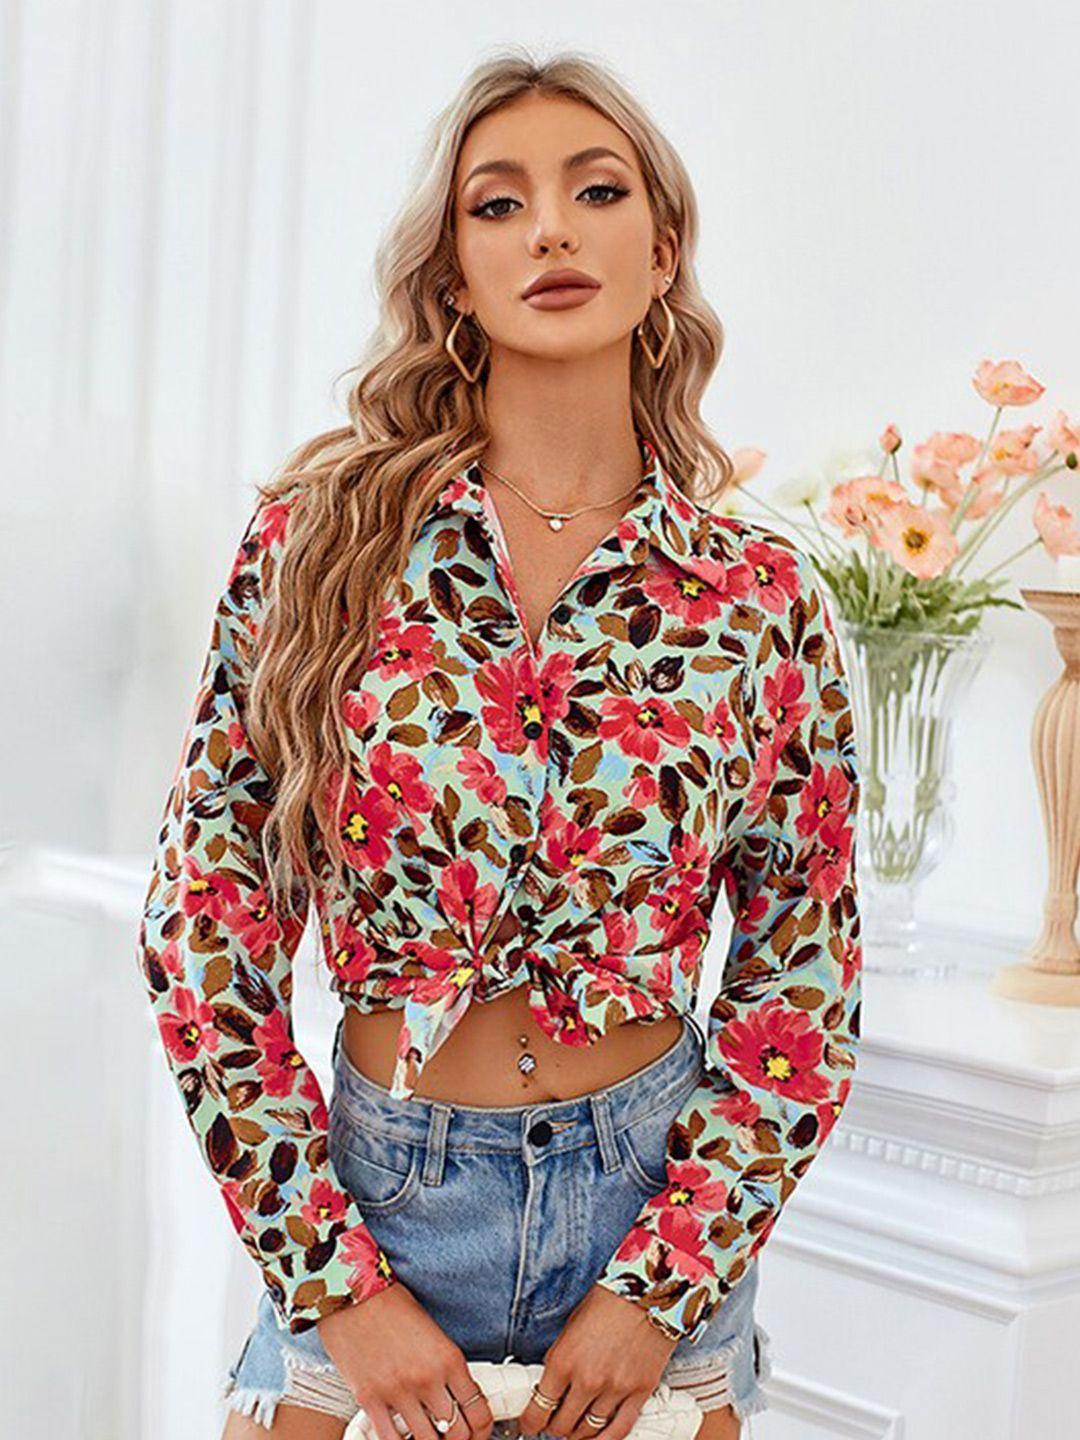 stylecast red floral printed shirt collar shirt style top